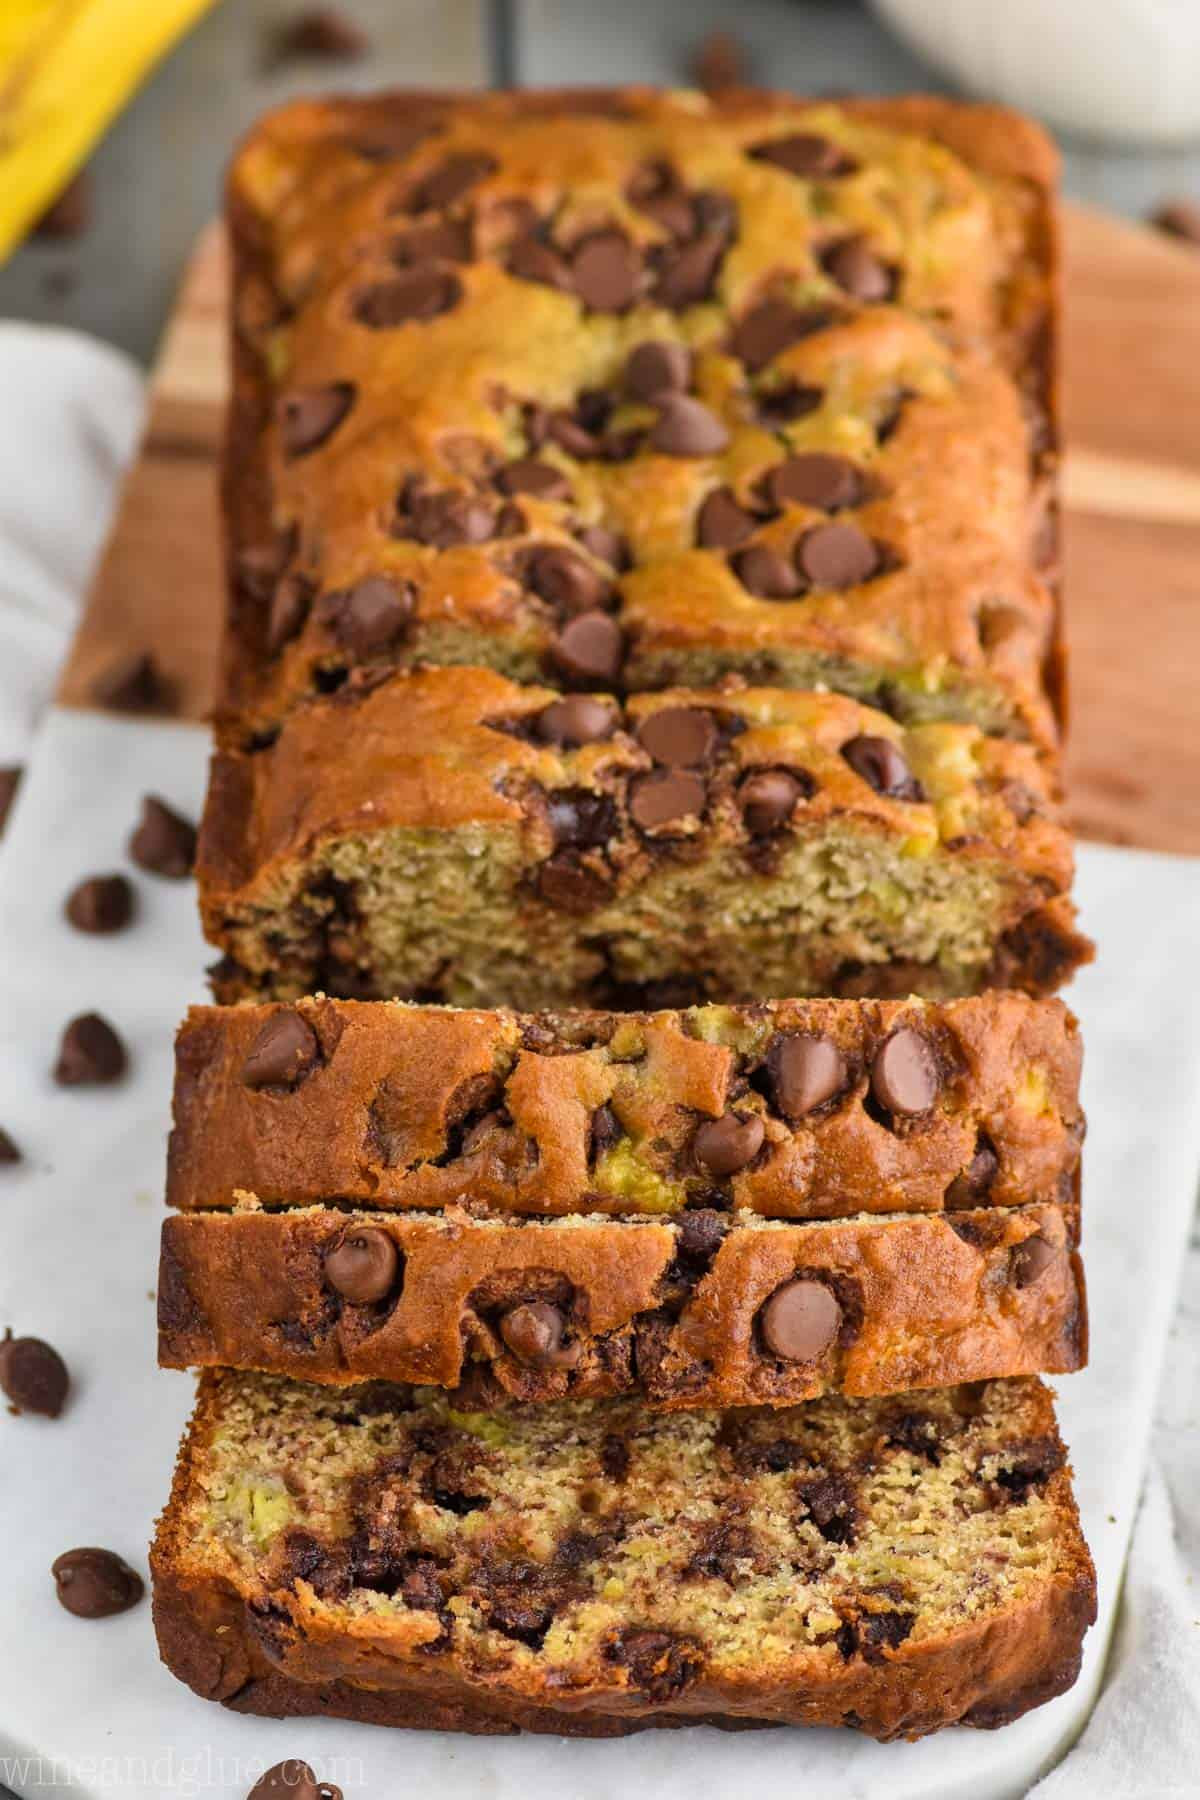 Our Most Shared Best Banana Chocolate Chip Bread Recipe Ever